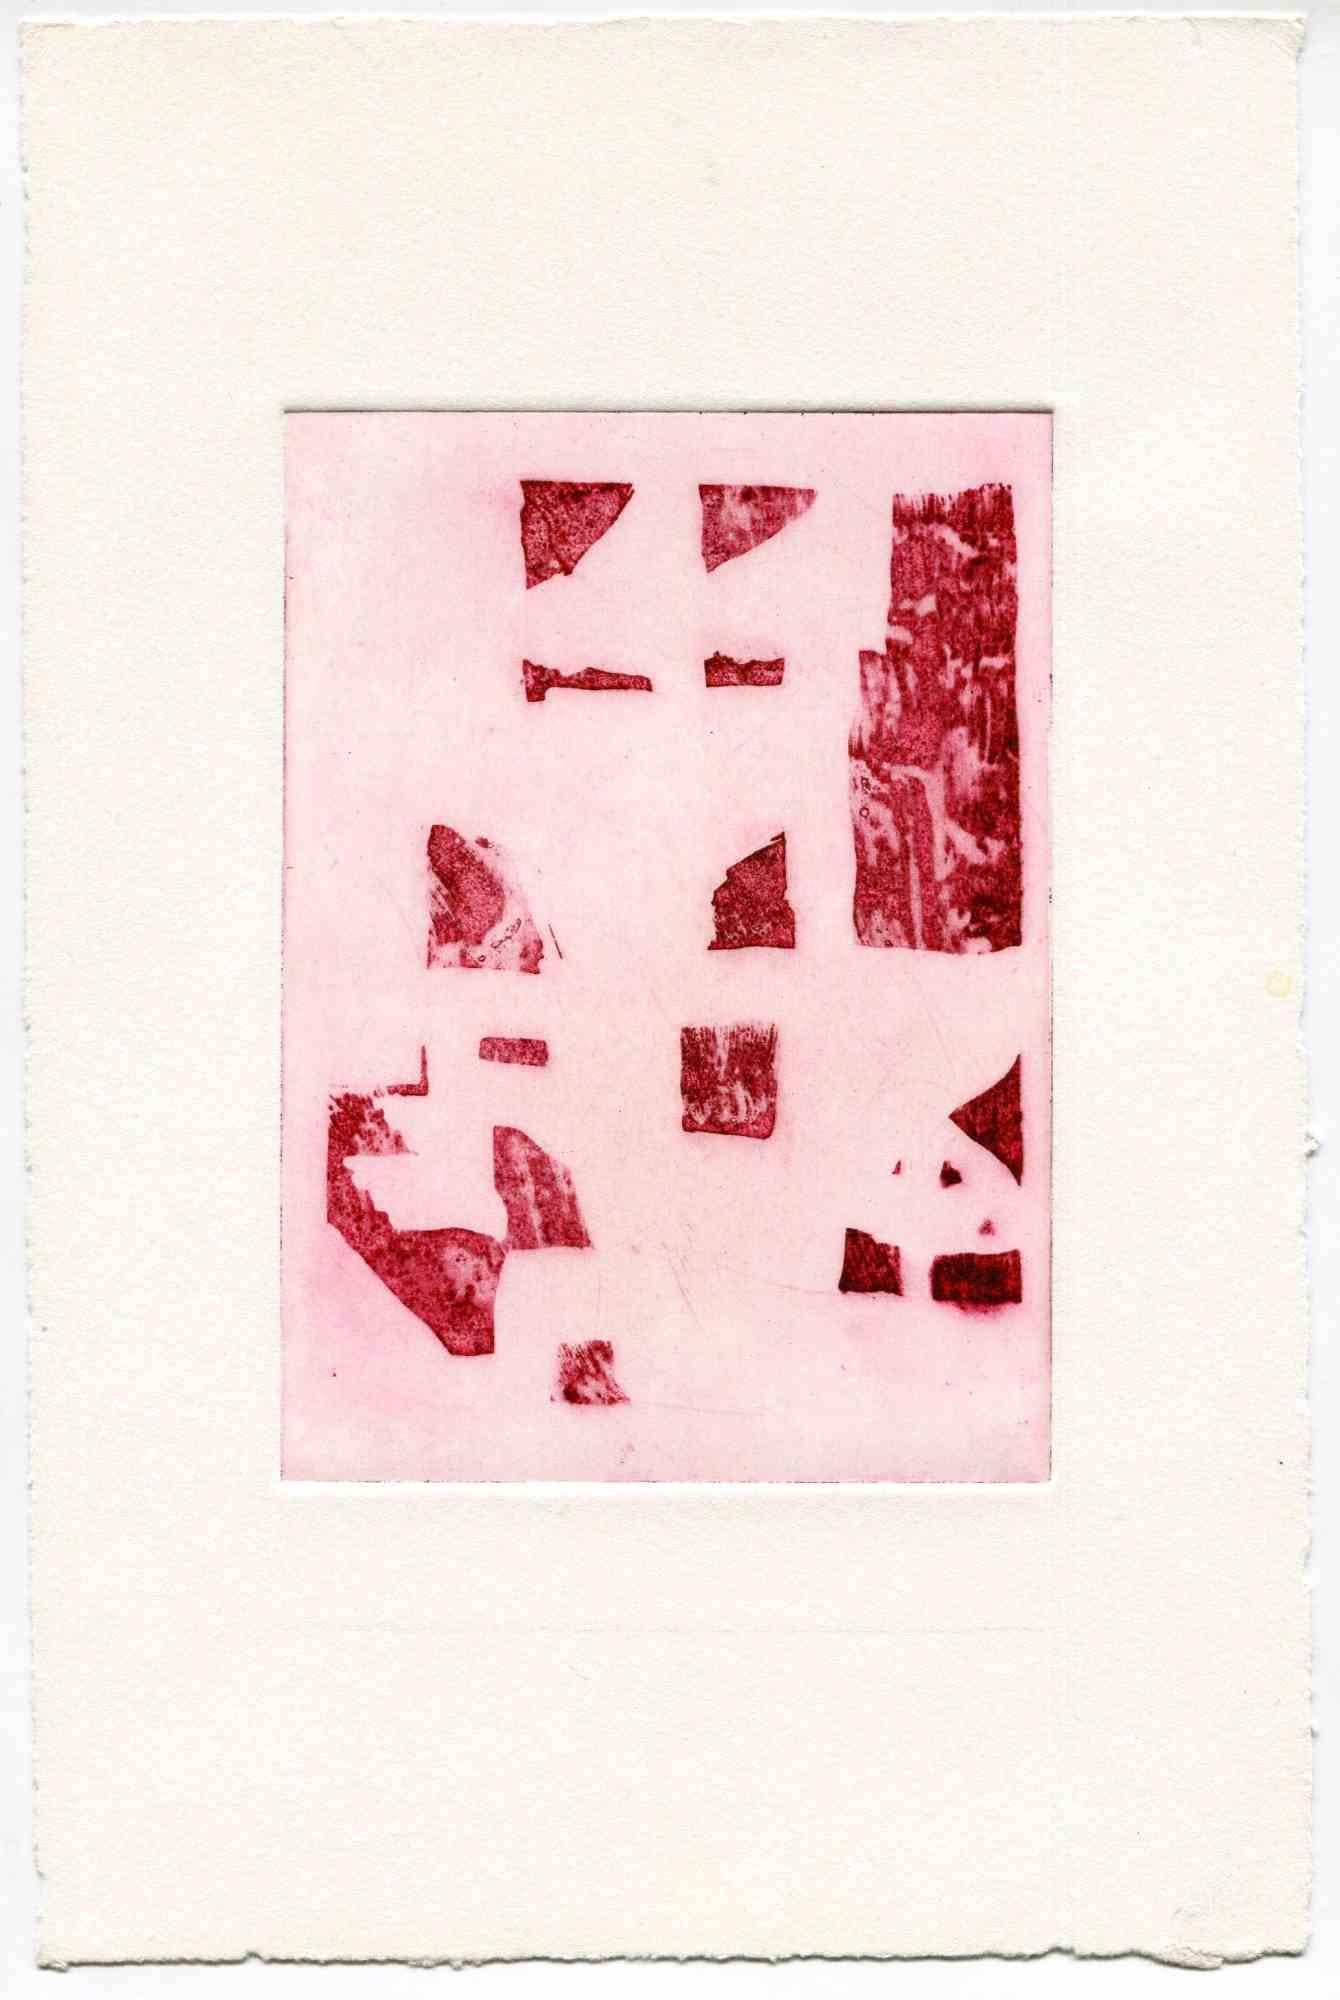 Unknown Figurative Print - Composition in Red - Original Etching and Drypoint - Mid-20th Century